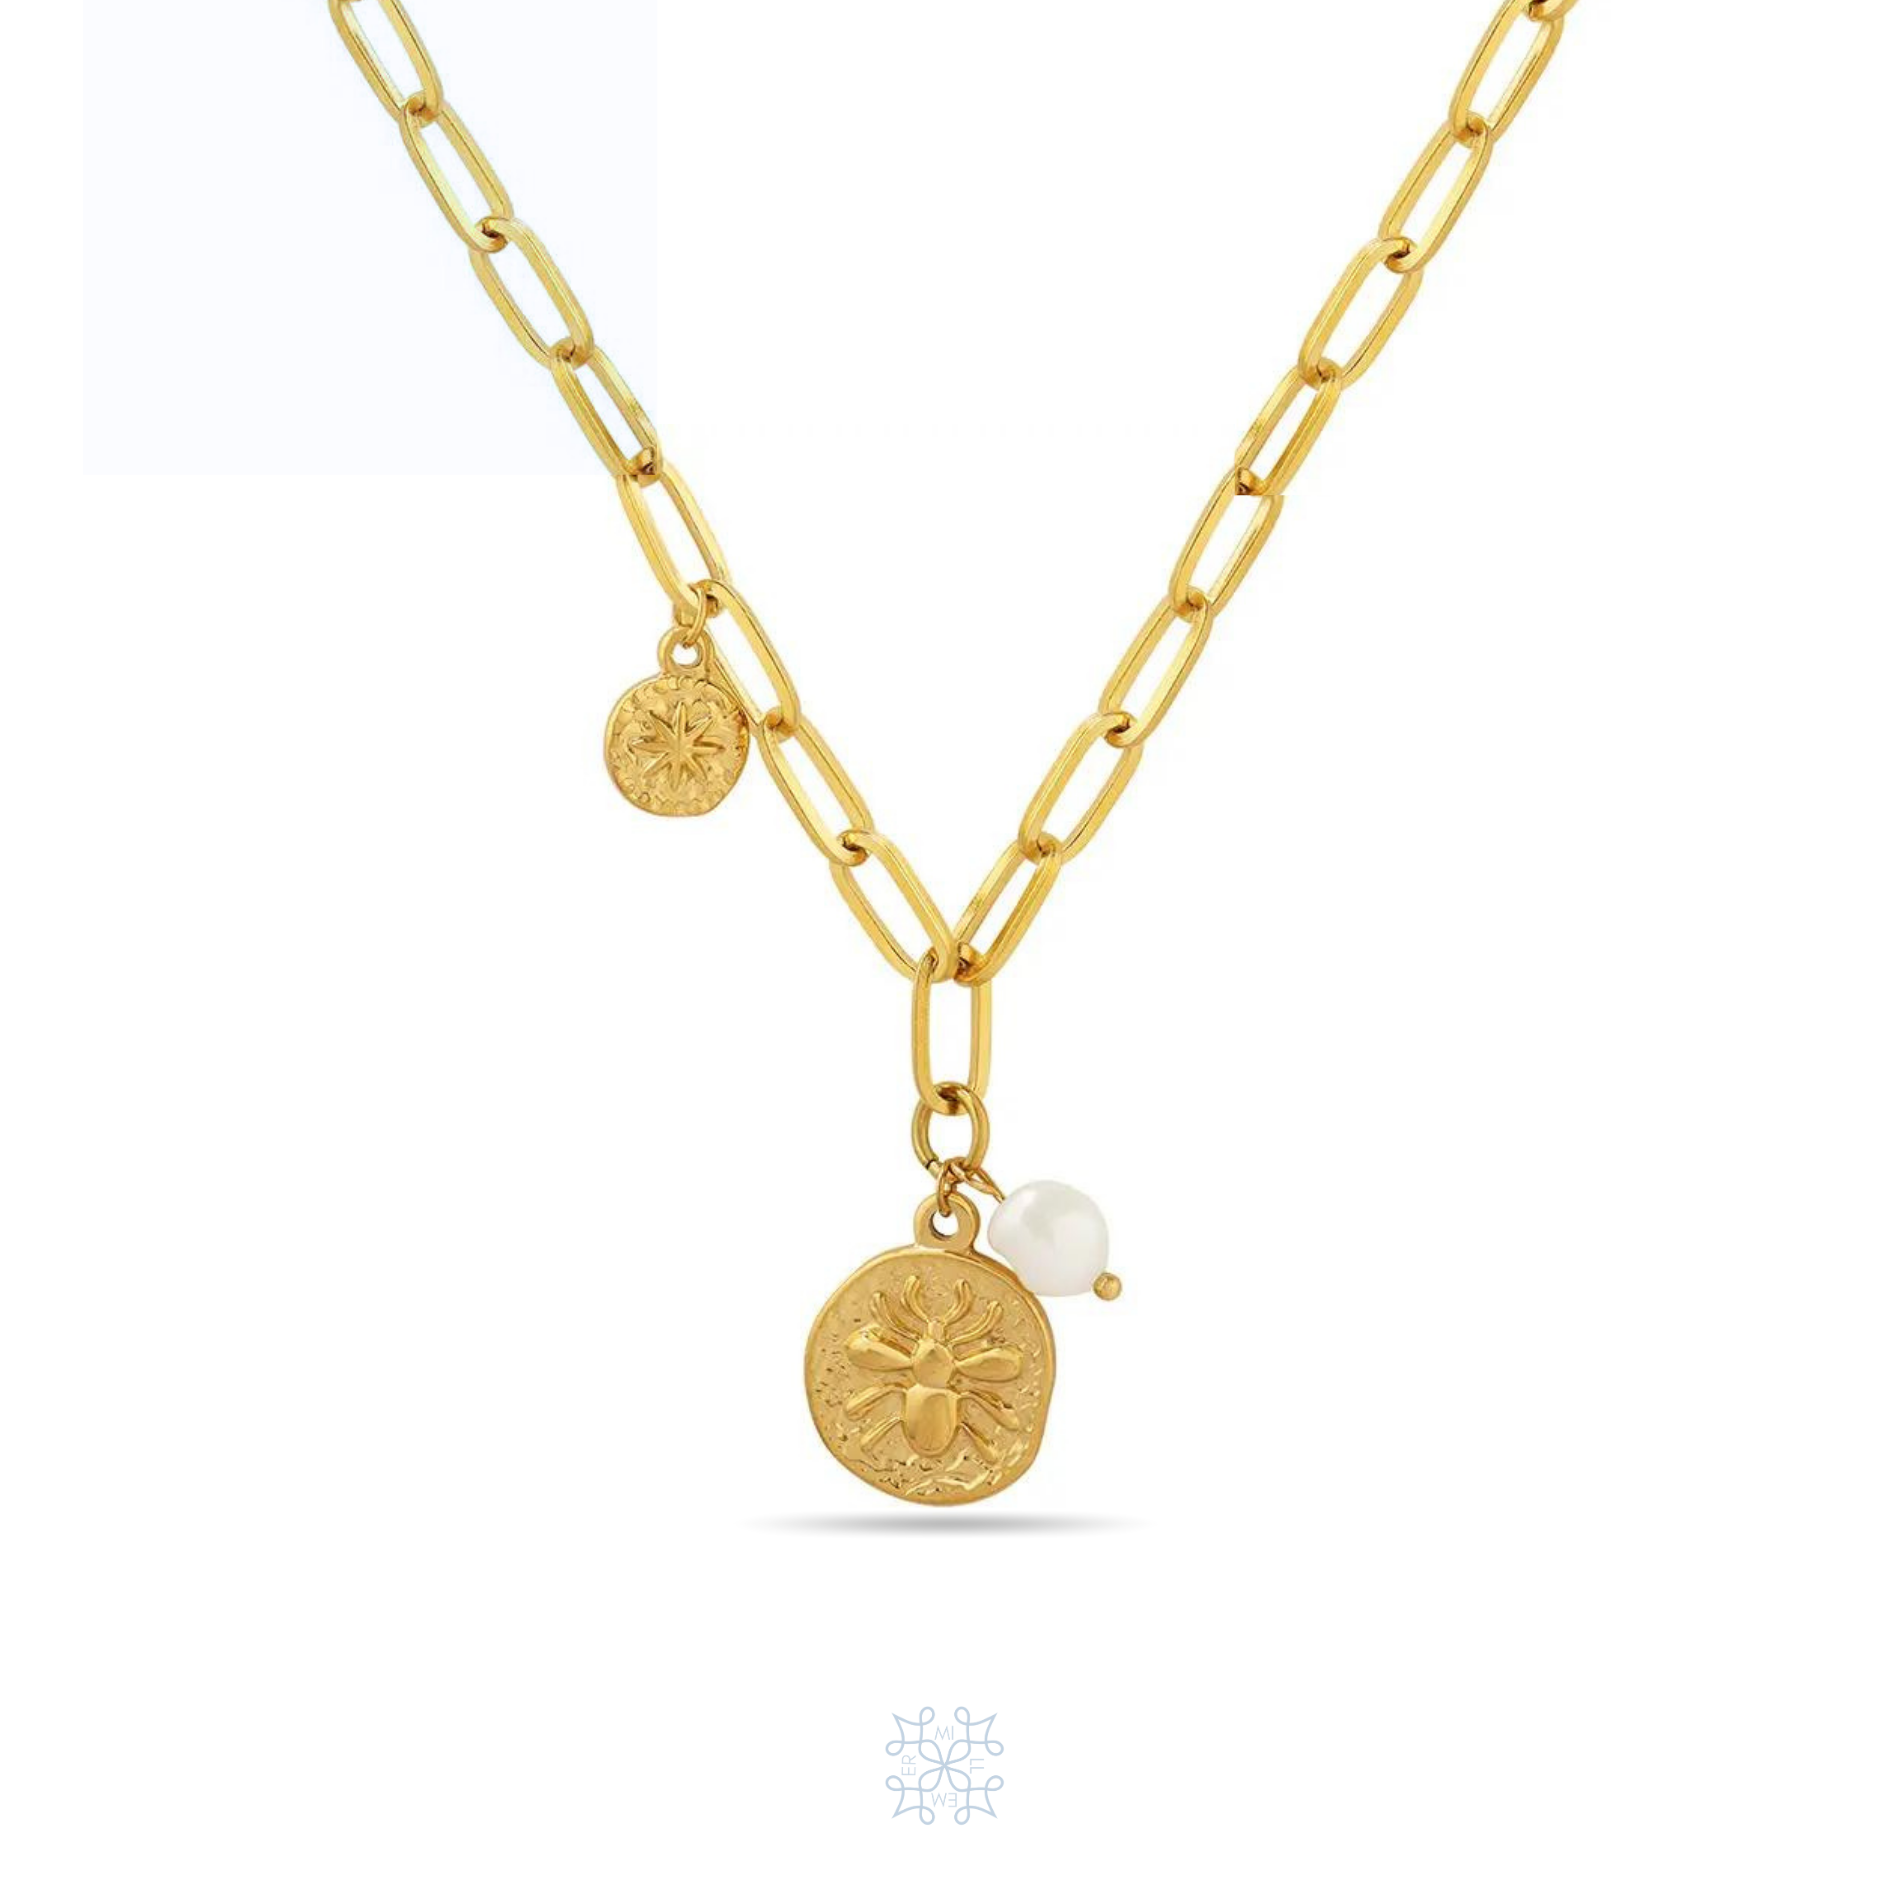 a medallion with a vintage texture. with a bee engraved on the medallion. a white pearl hangs on the side of the locket, on the other side hangs a smaller locket with a star engraved on it. the three parts are hanging on a gold chain.